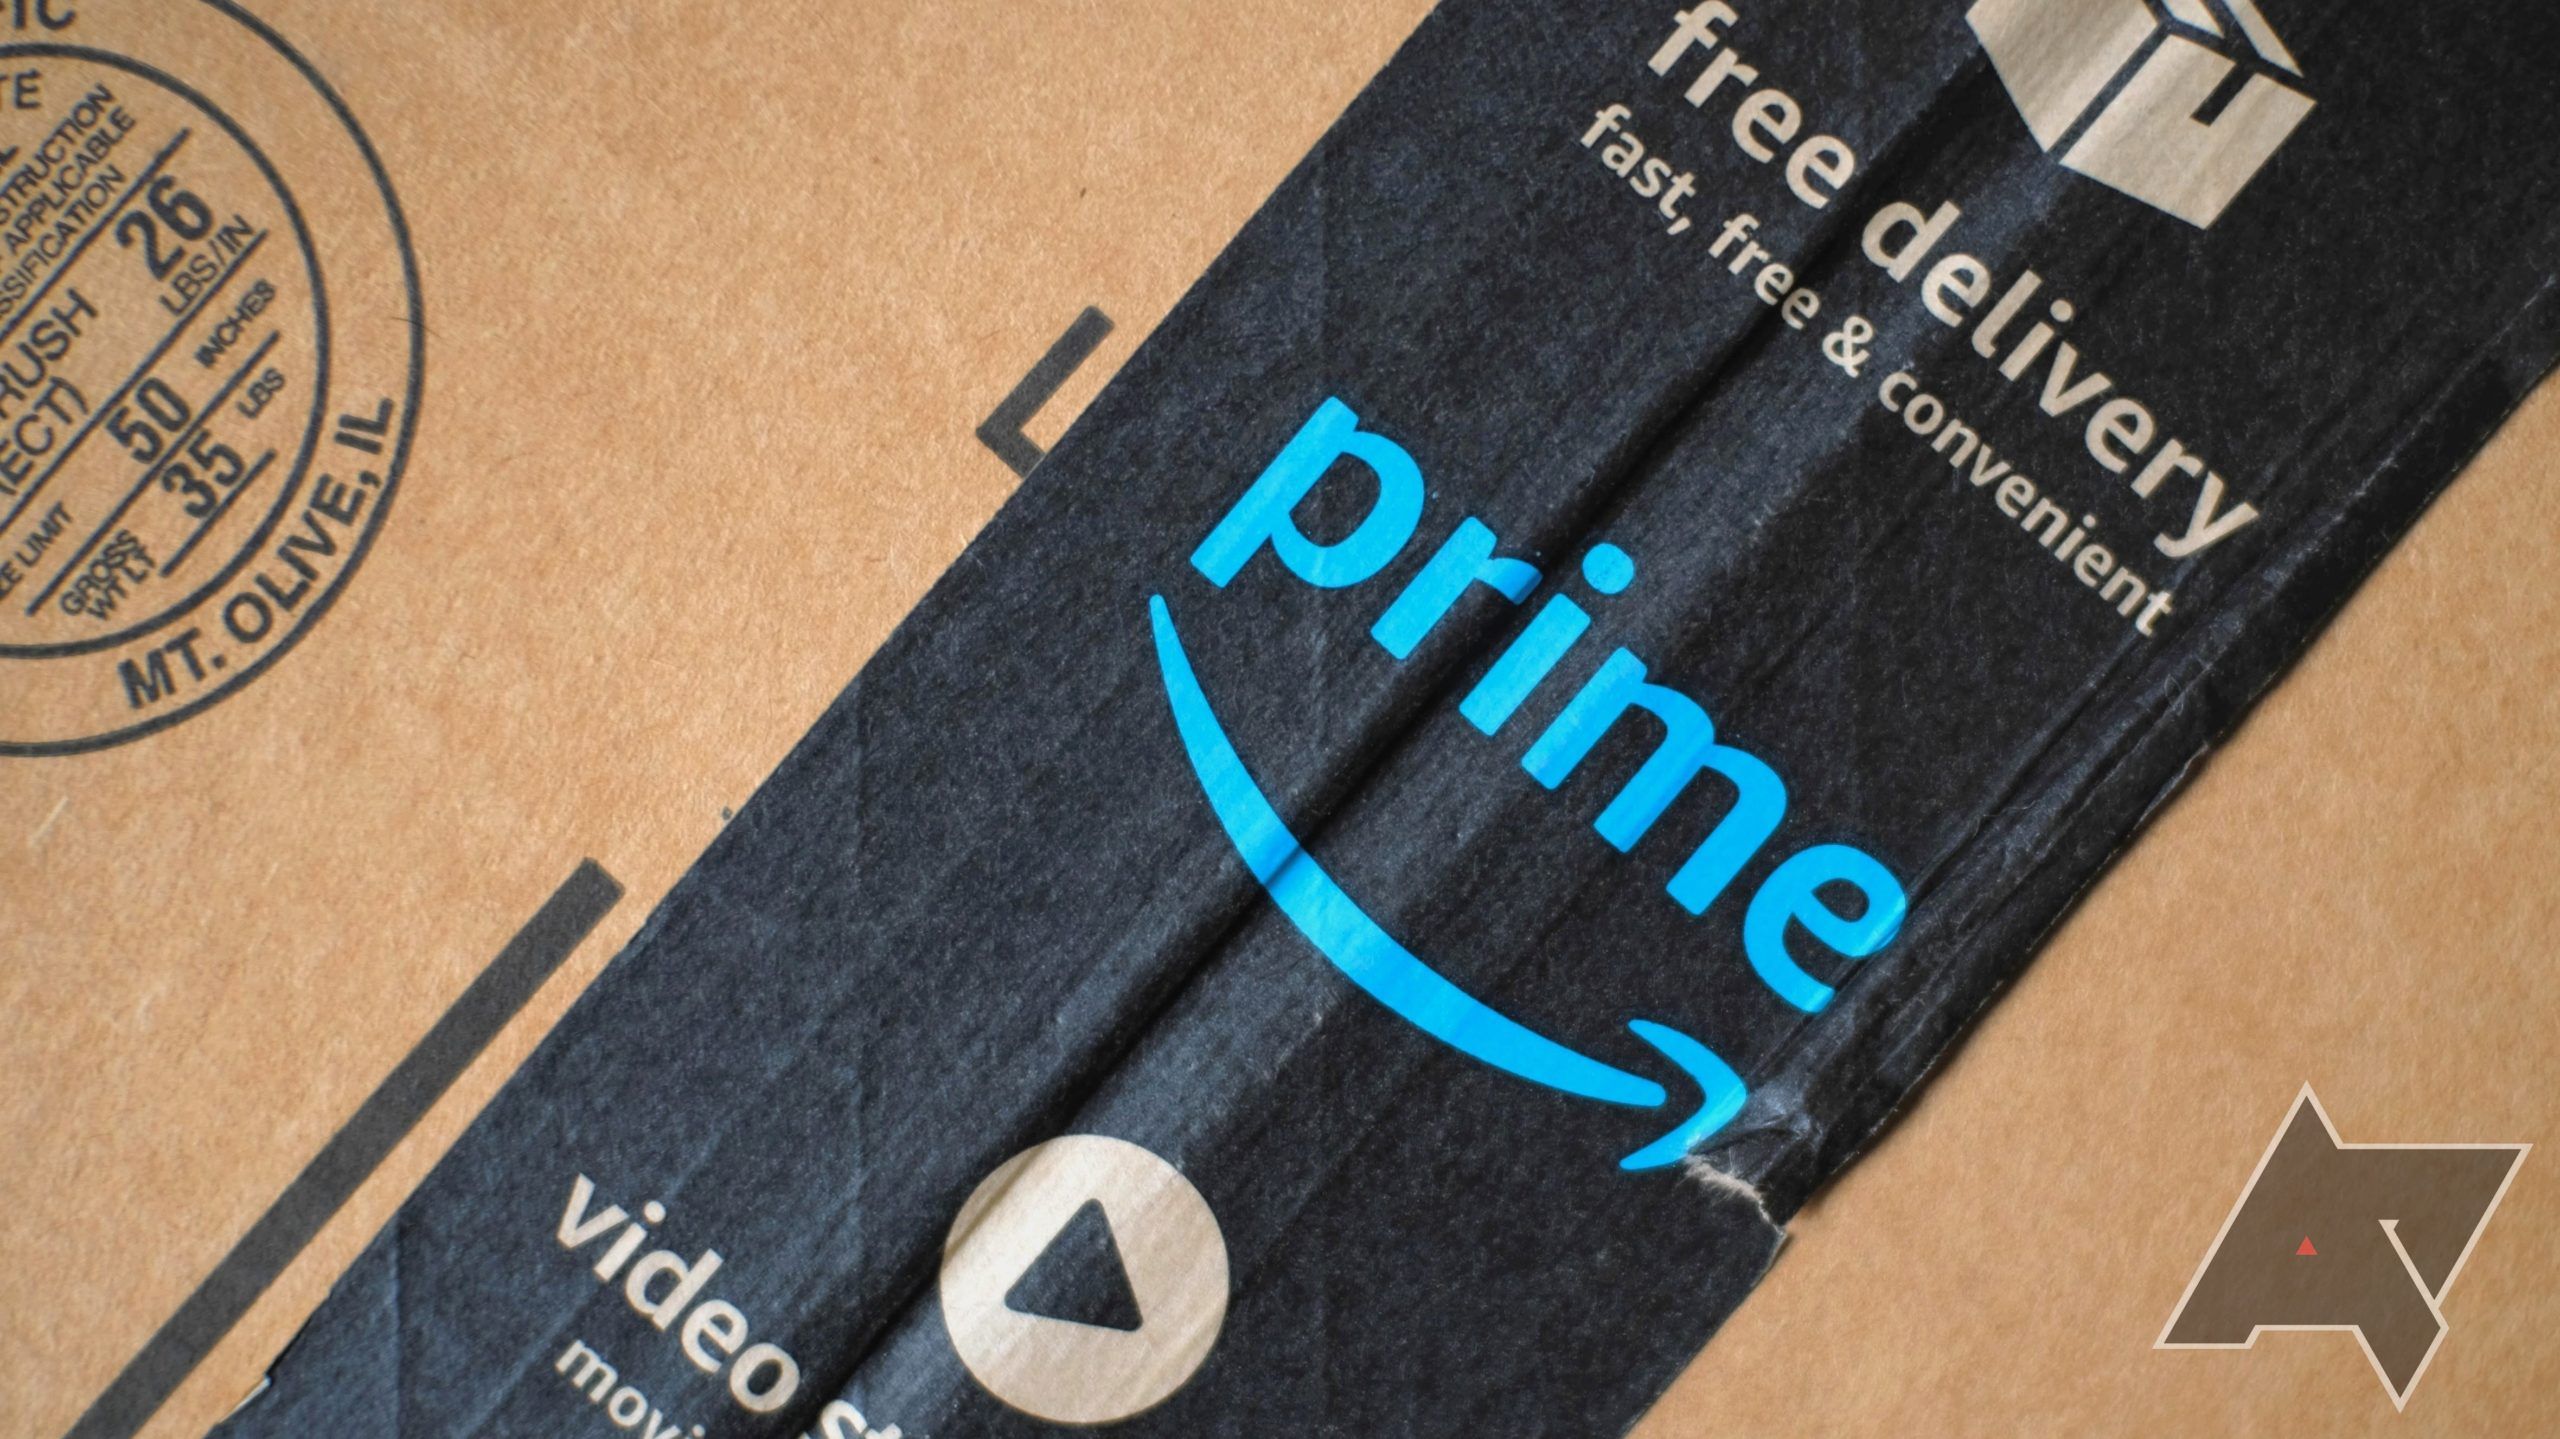 A close-up of the Amazon Prime logo on the tape of a shipping box